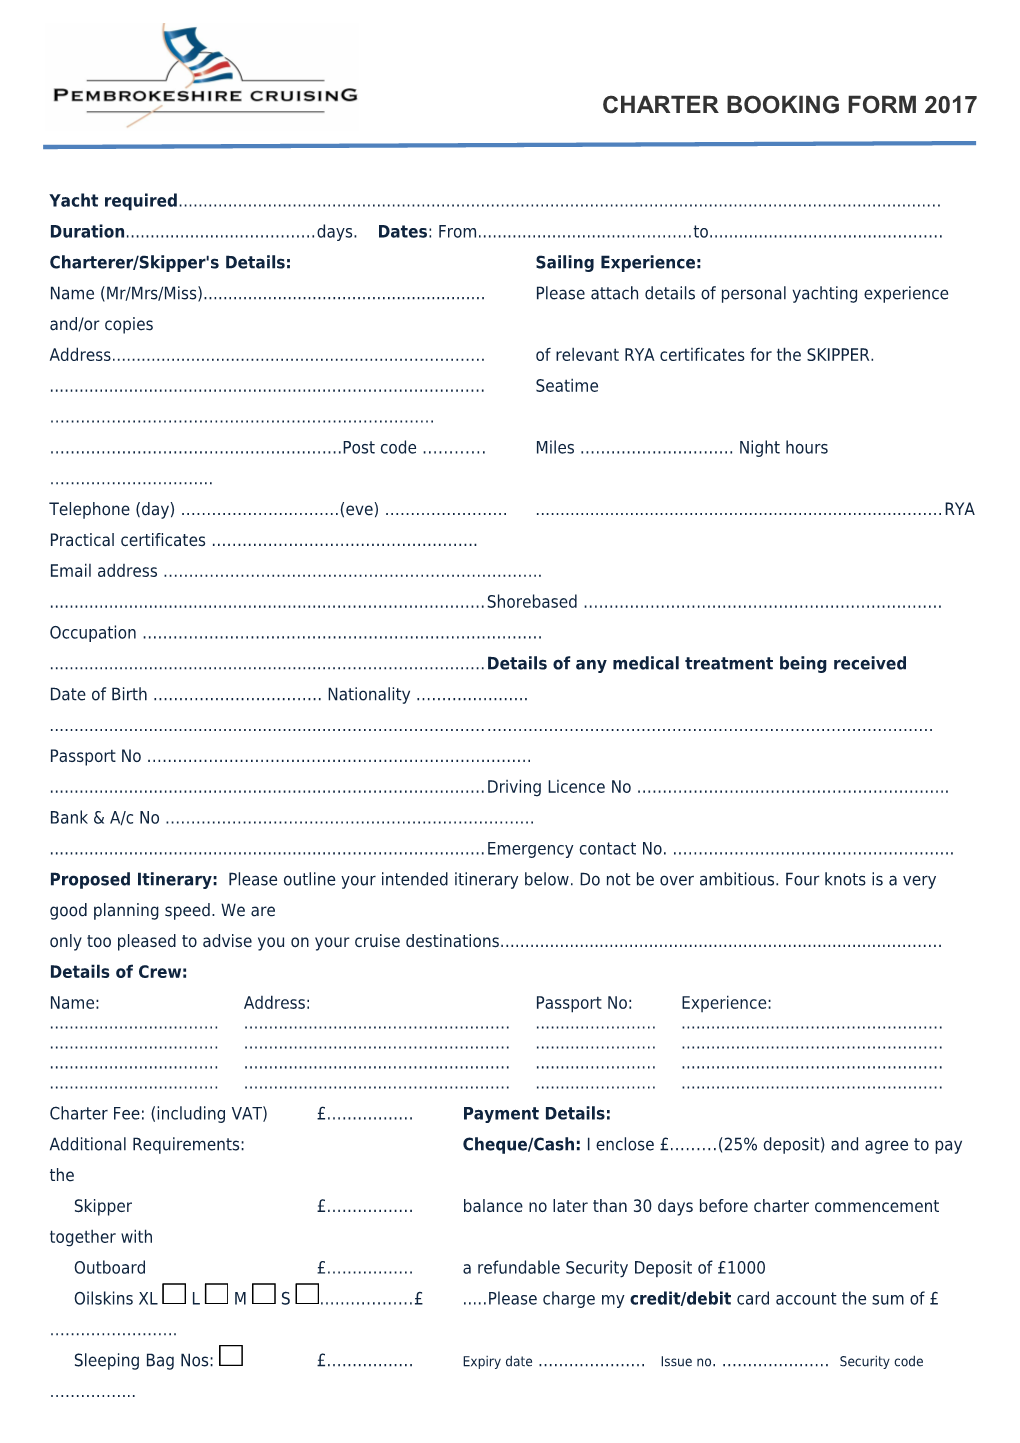 Charter Booking Form 2017